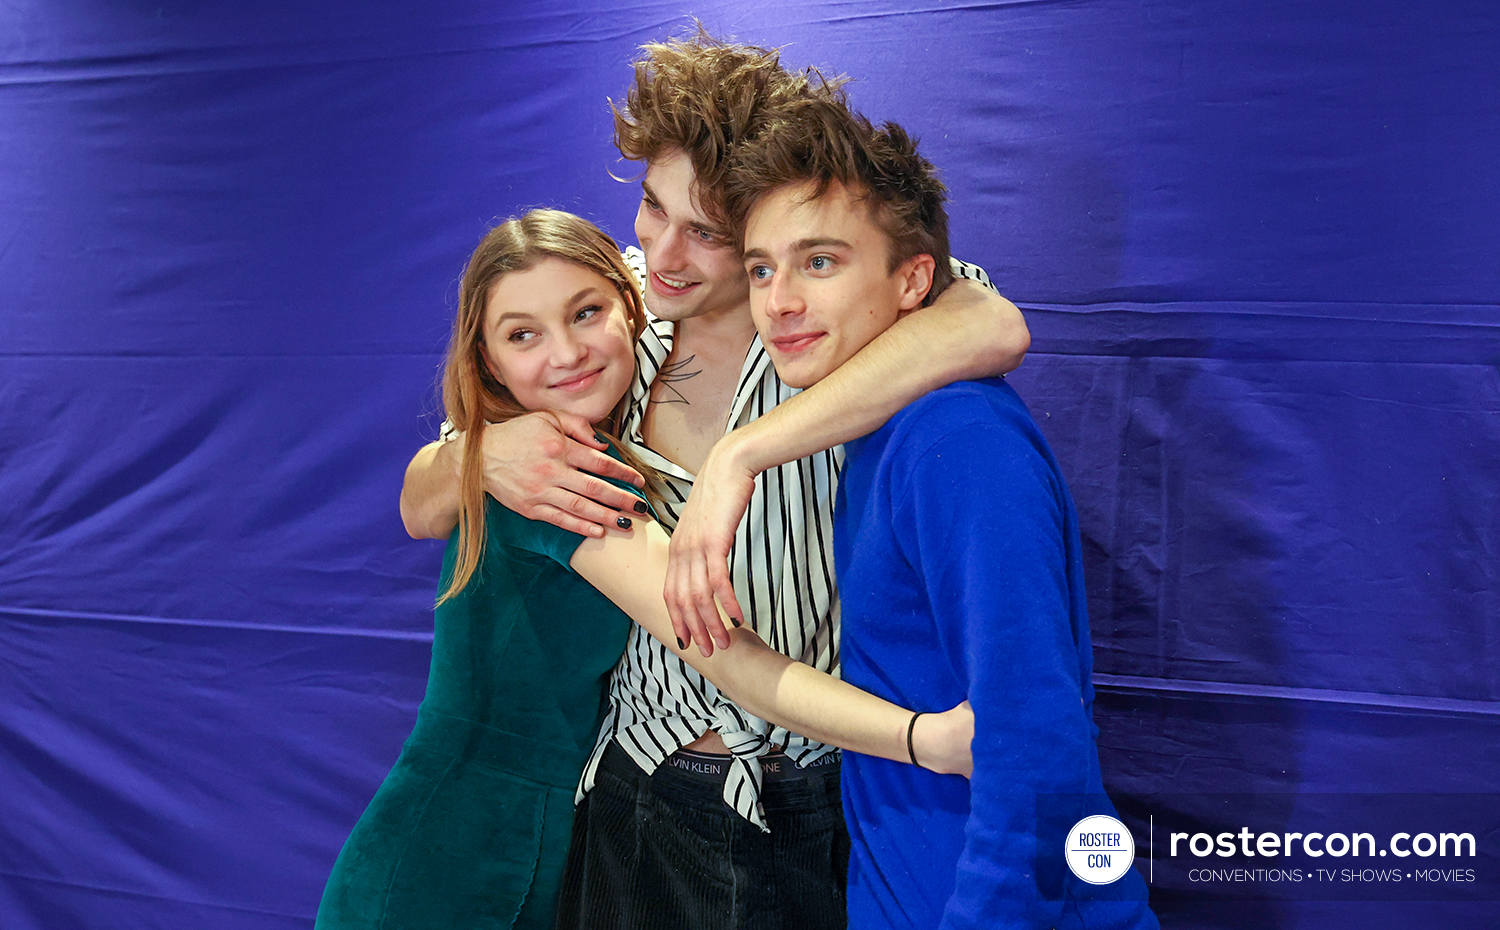 Flavie Delangle, Maxence Danet-Fauvel & Axel Auriant - Photoshoot - Skam France - Everything is Love 5